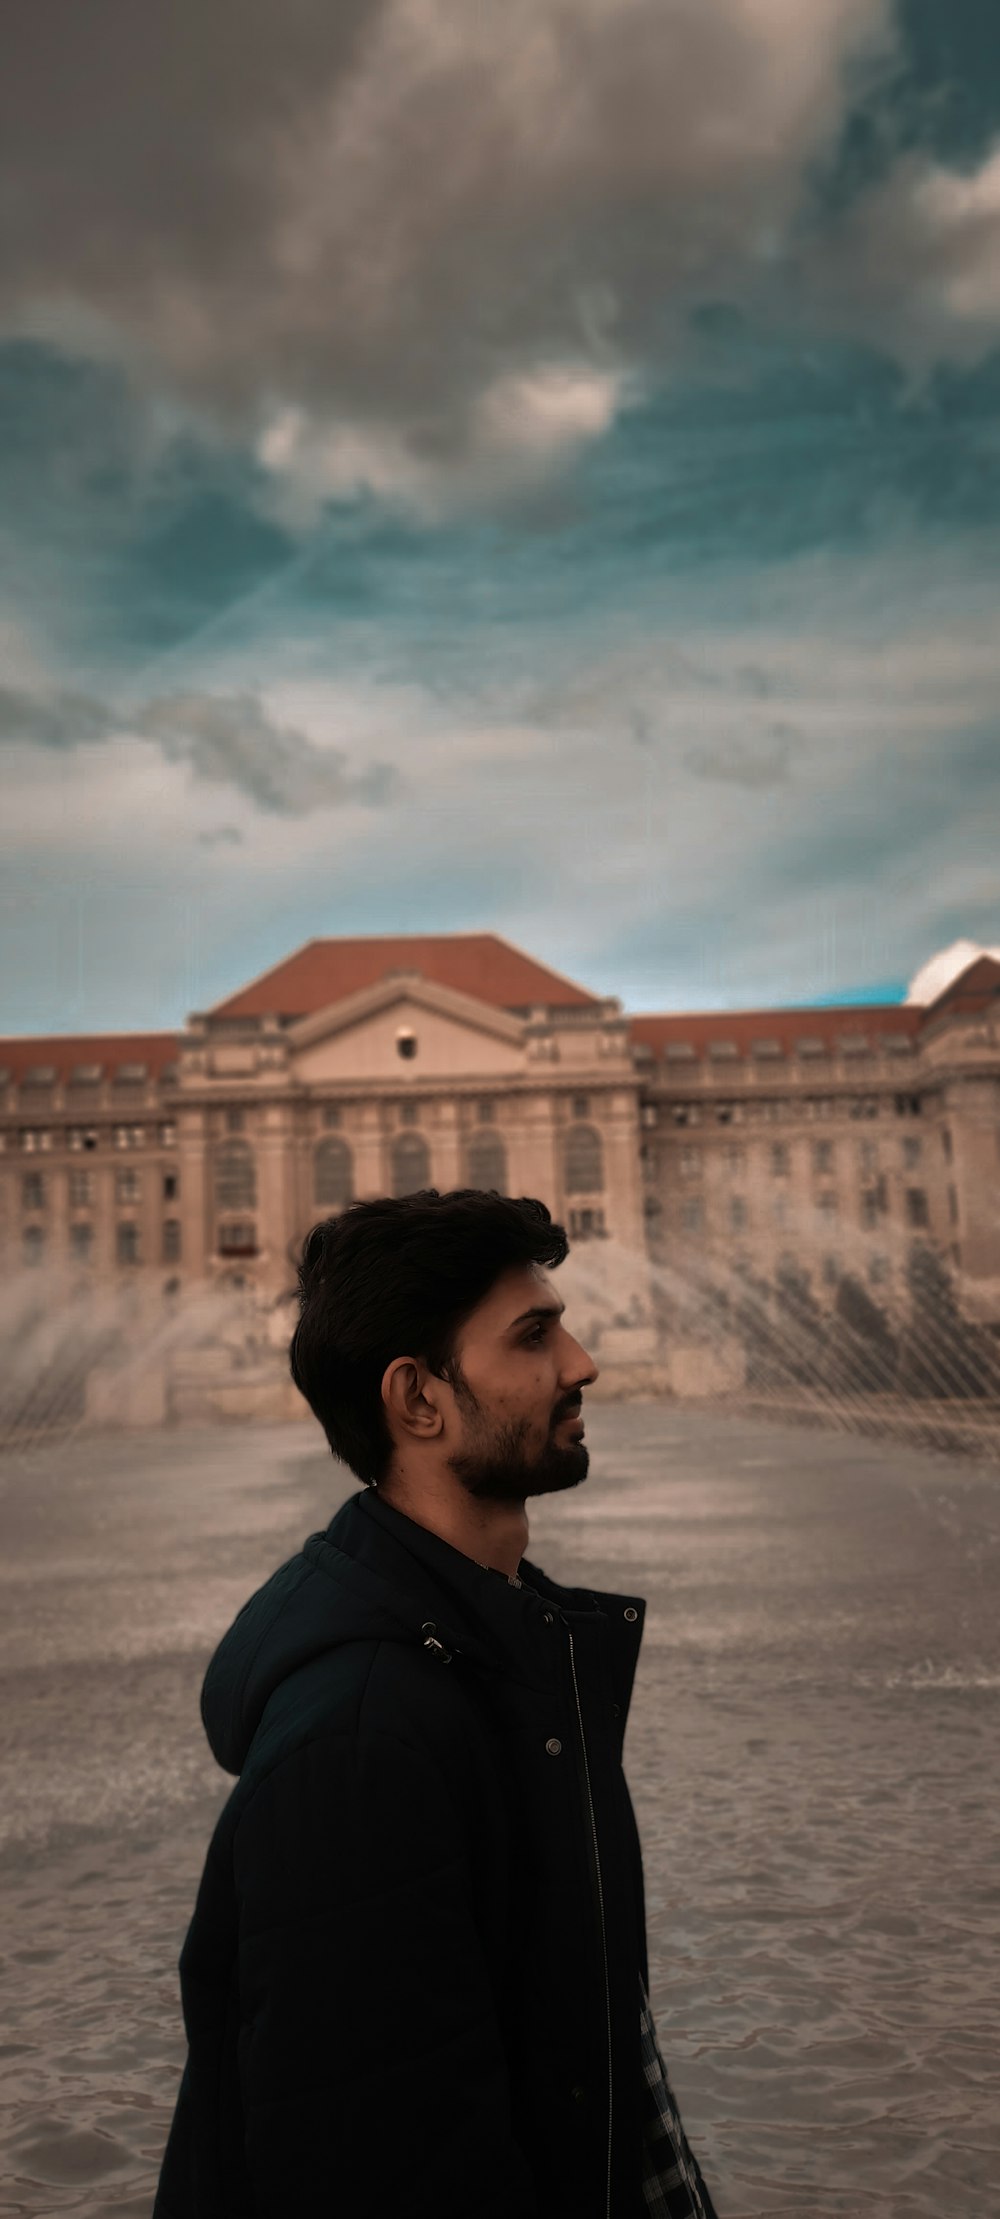 a man standing in front of a large building